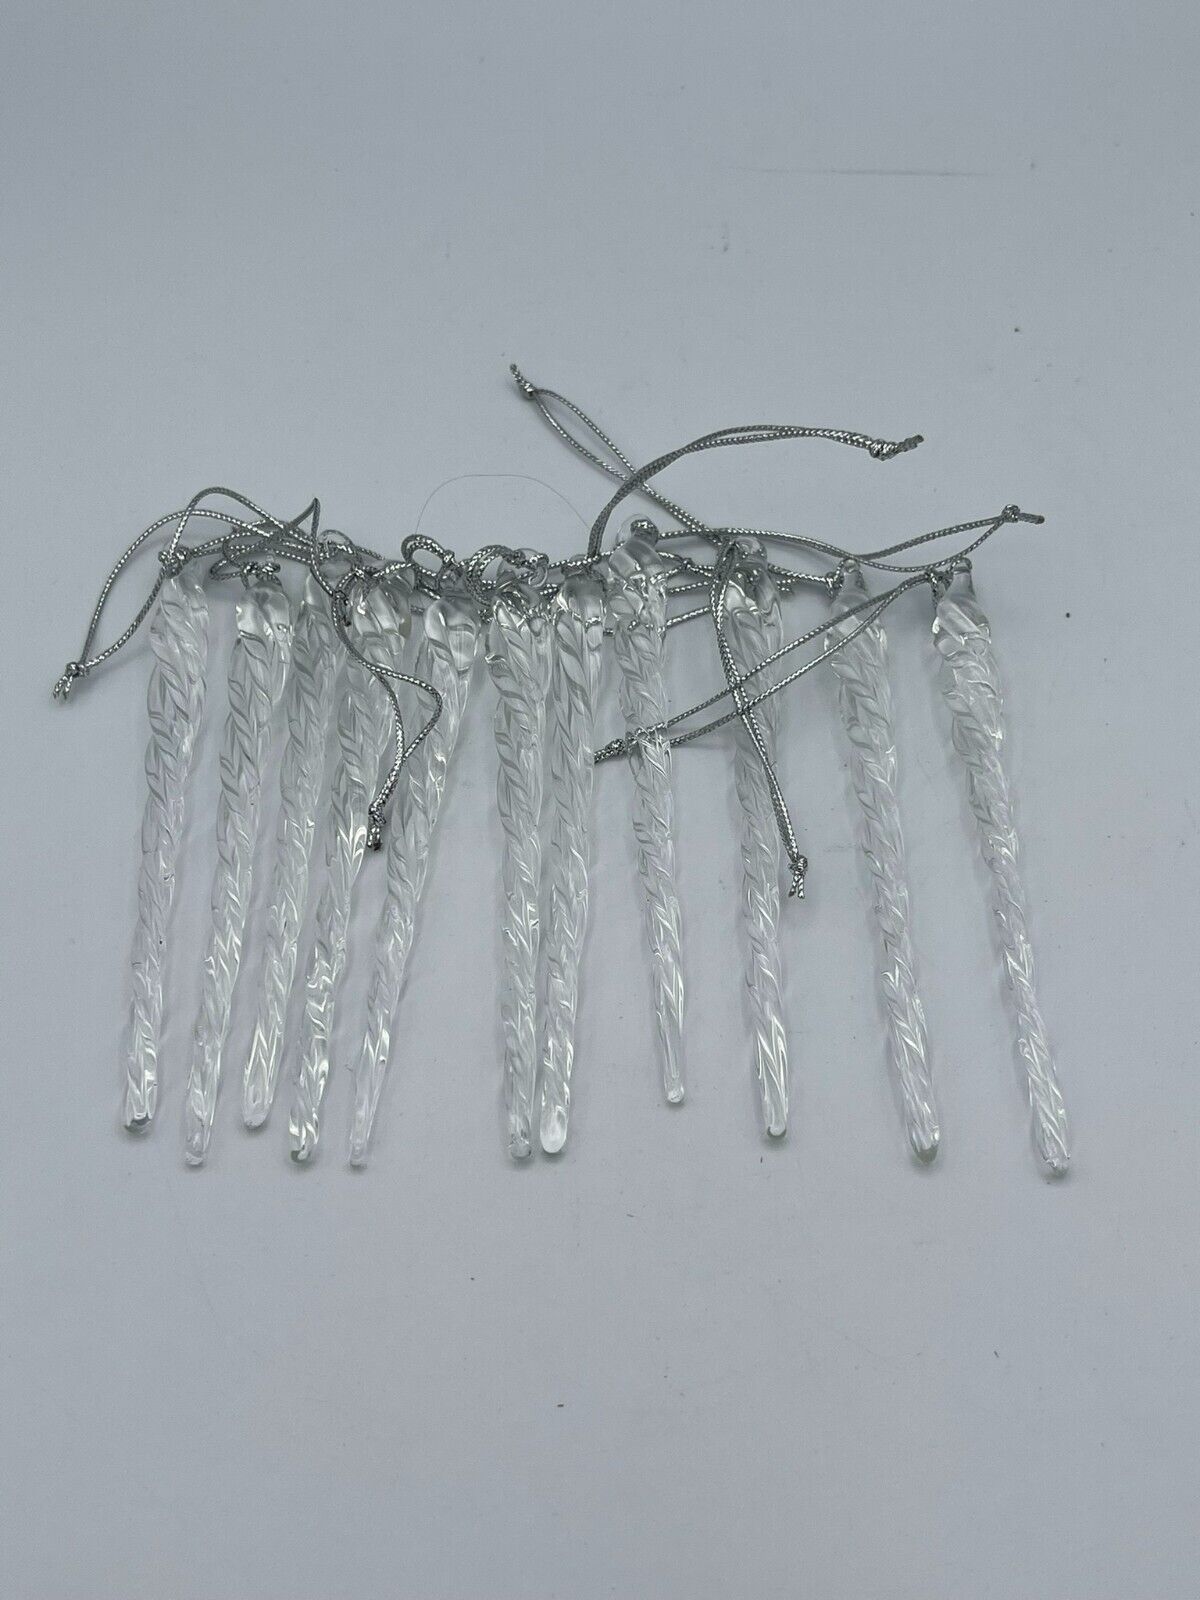 Vintage Lot of 39 Clear Blown Glass Icicle Christmas Ornaments - 3 Sizes